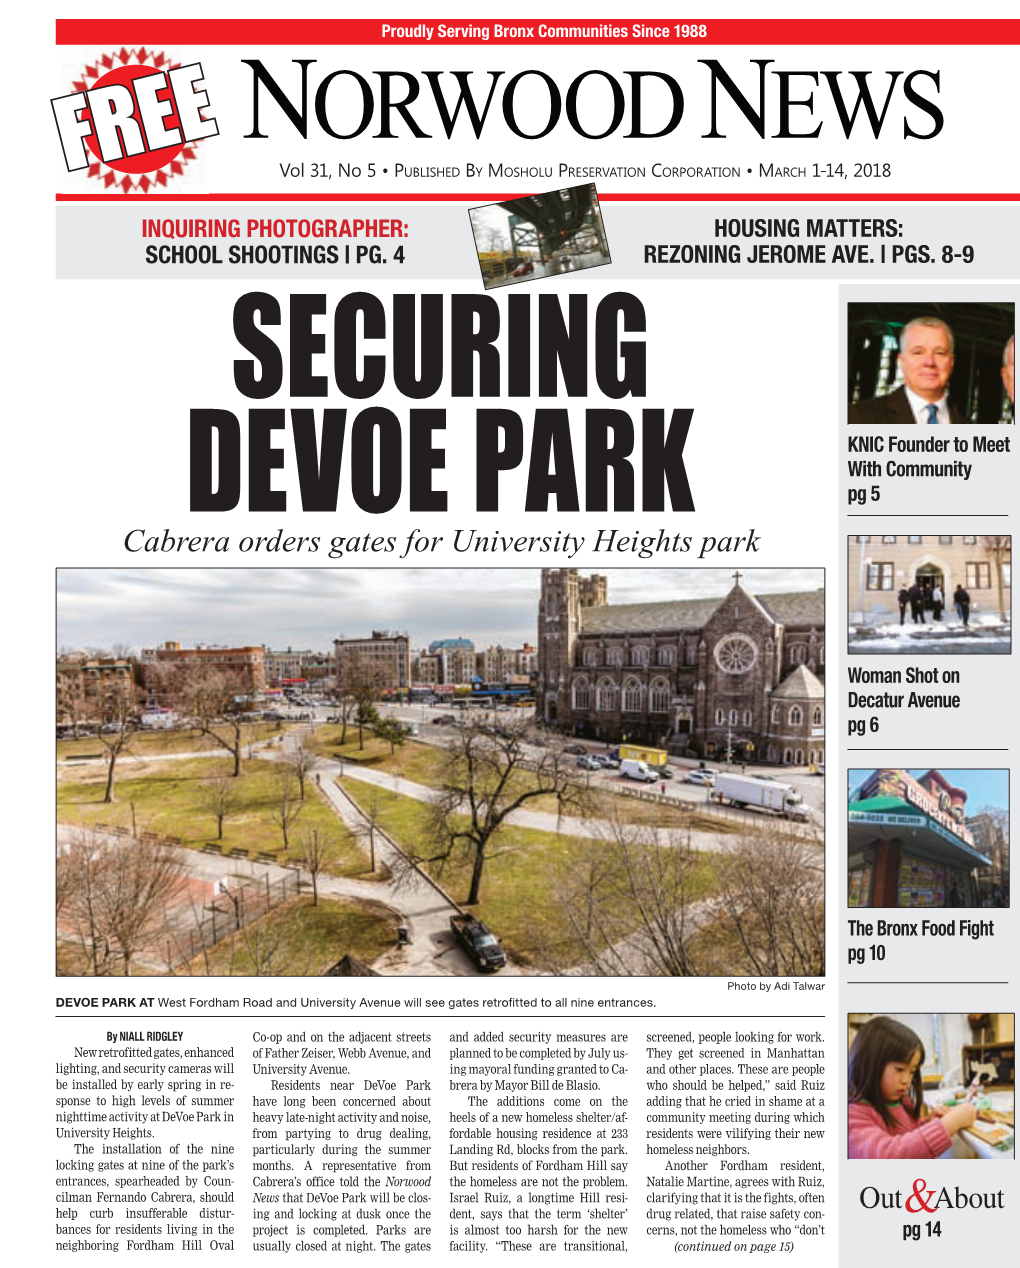 March 1-14, 2018 • Norwood News in the PUBLIC INTEREST Vol